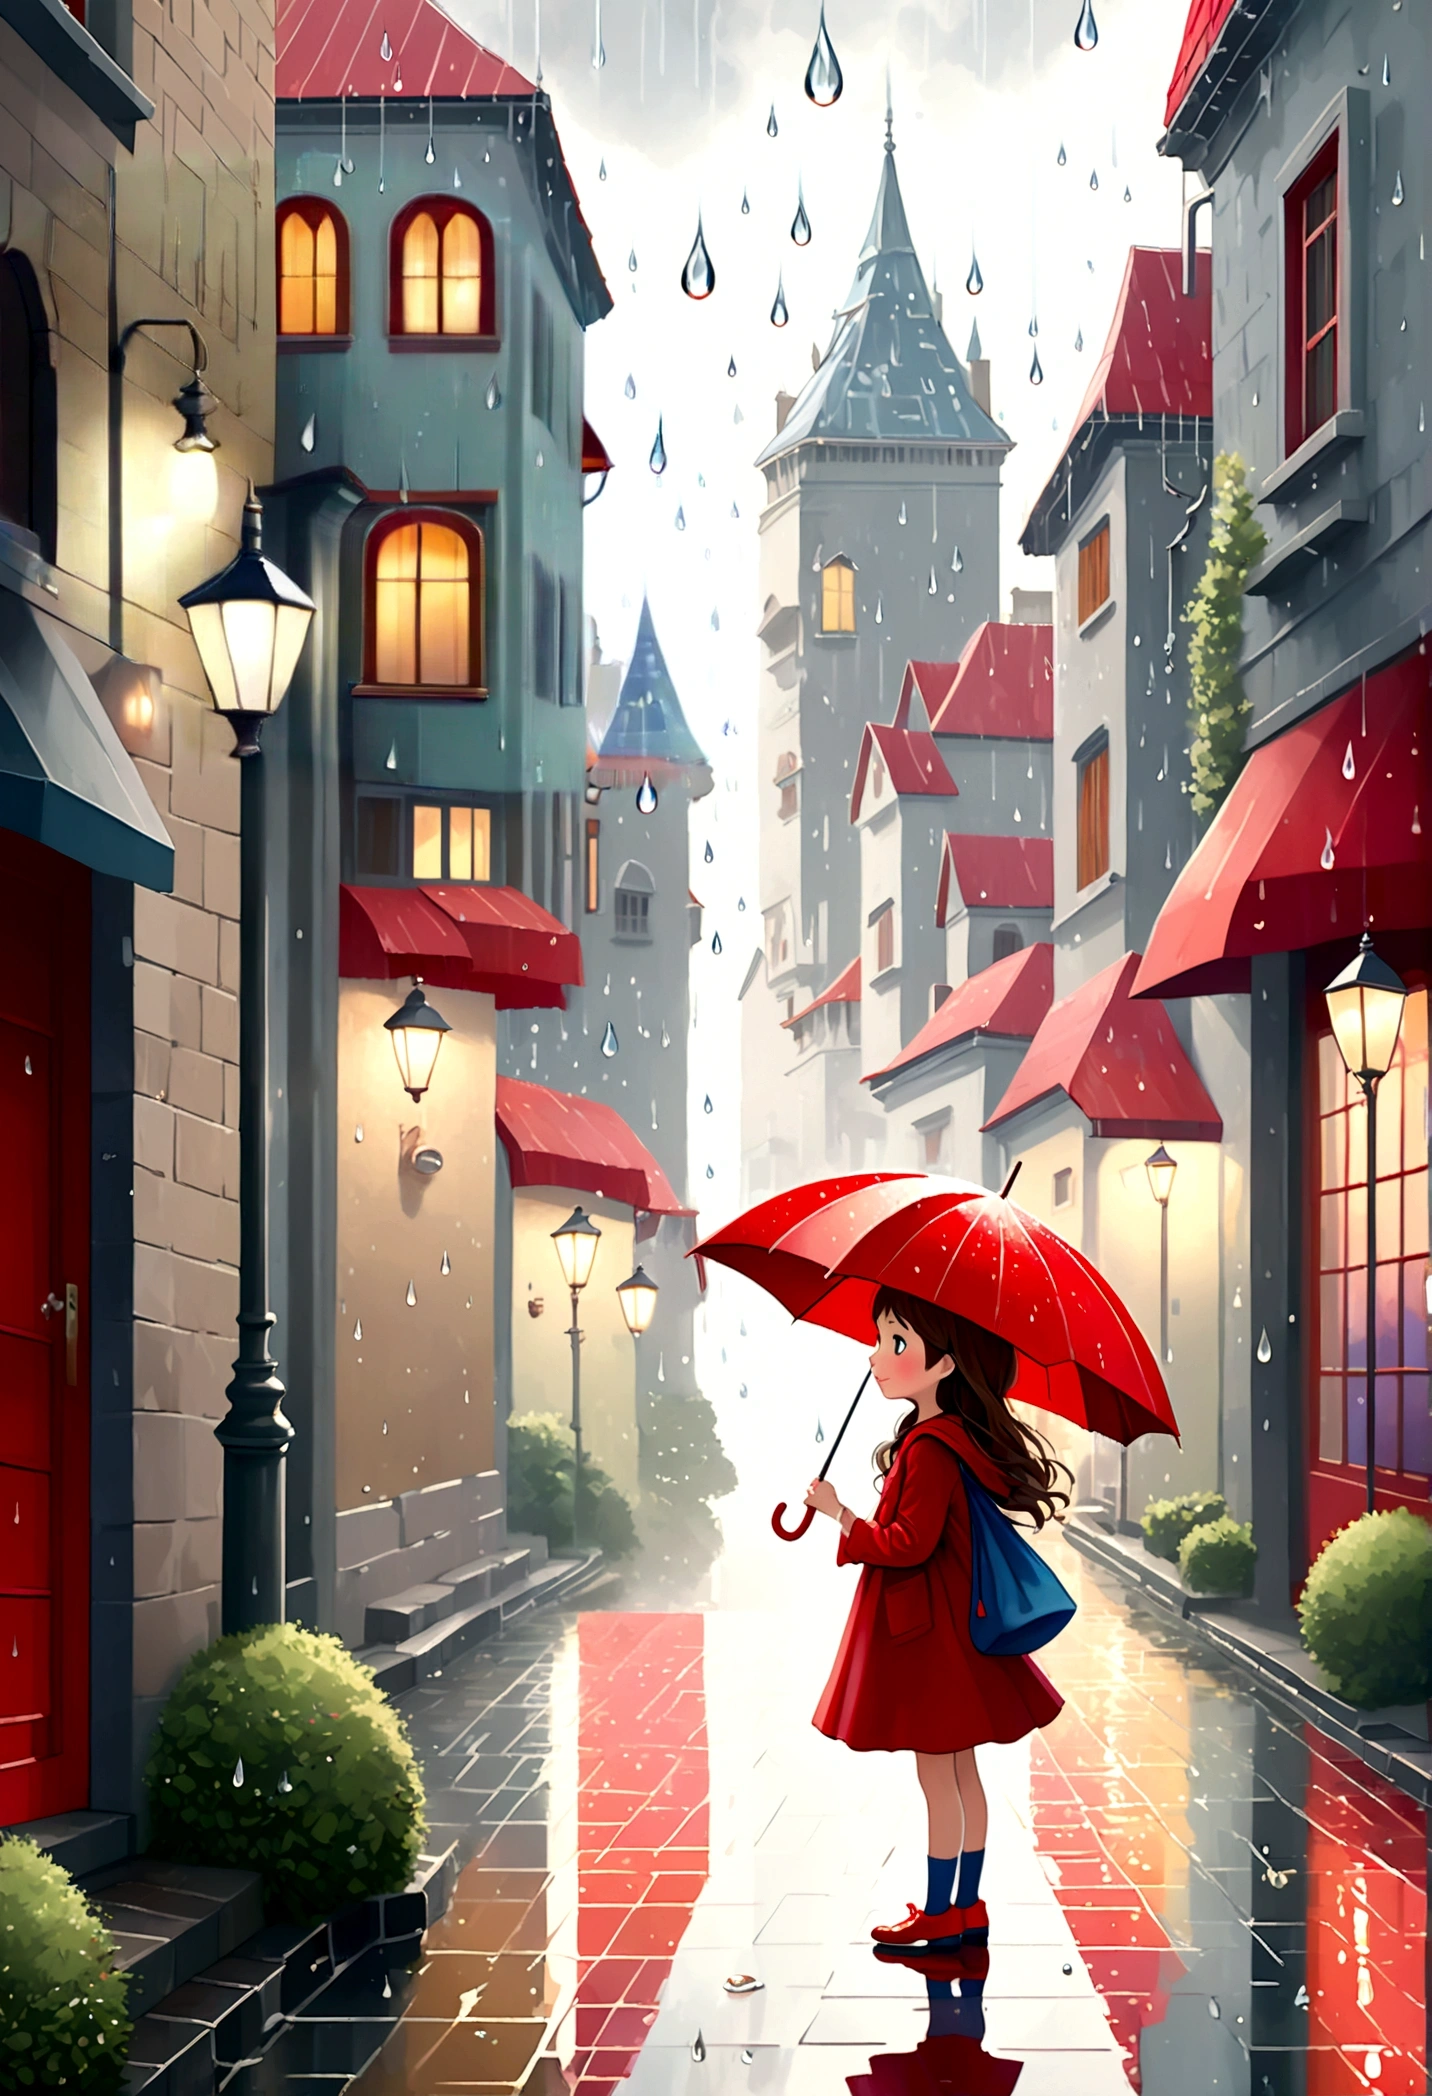 Fixes,Cute illustration: Landscape,Street corner on a rainy day,A landscape that looks like an illustration from a picture book,rich in emotion,Cute girl with a red umbrella,create an artistic background,Add a drop pattern to the background,The streets are fancy, like a fairy tale,This is a cute illustration like a dream.,Please blur the lines of the droplet pattern to create an artistic expression.,Intricate details,Wide range of colors,artwork,rendering,(masterpiece:1.3),(highest quality:1.4),(Super detailed:1.5),High resolution,Very detailed,unity 8k wallpaper